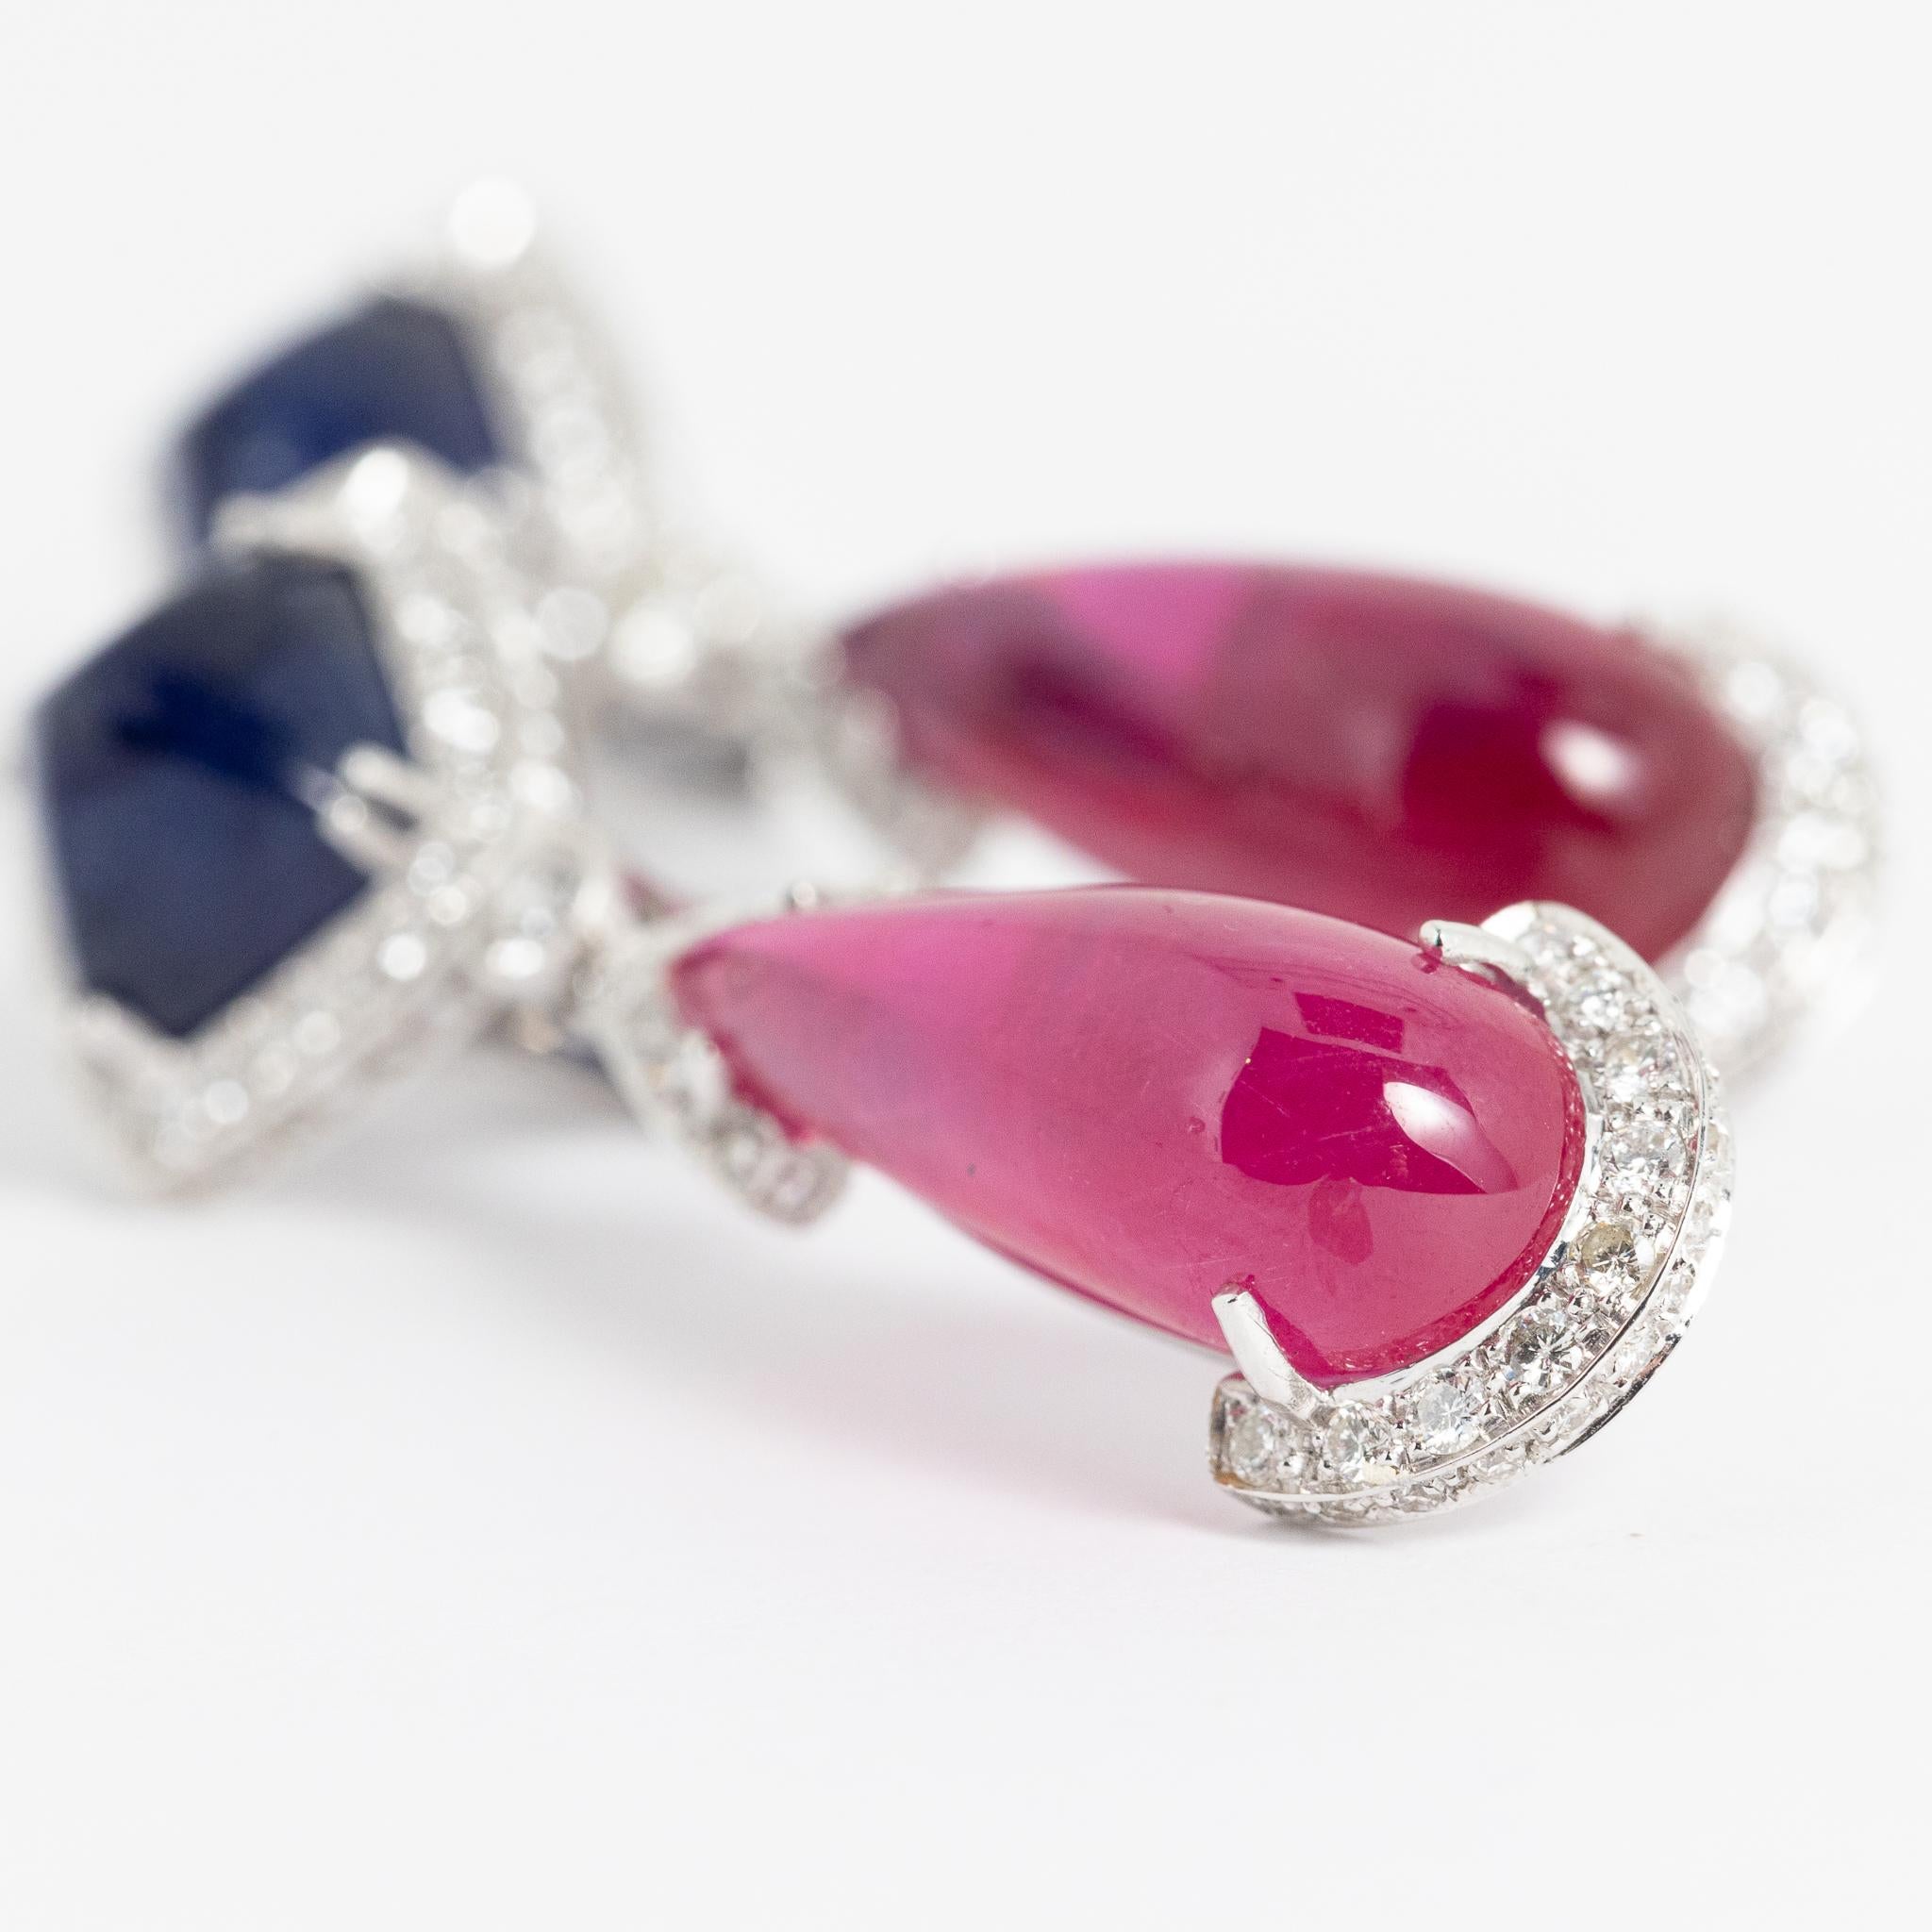 Handmade in Italy 18 kt. white gold earrings with brilliant-cut diamonds, sugarloaf-cut sapphires and cabochon-cut rubies.
This piece belongs to Fraleoni's Diamond collection.
This classic design is enhanced by the color play of rubies and